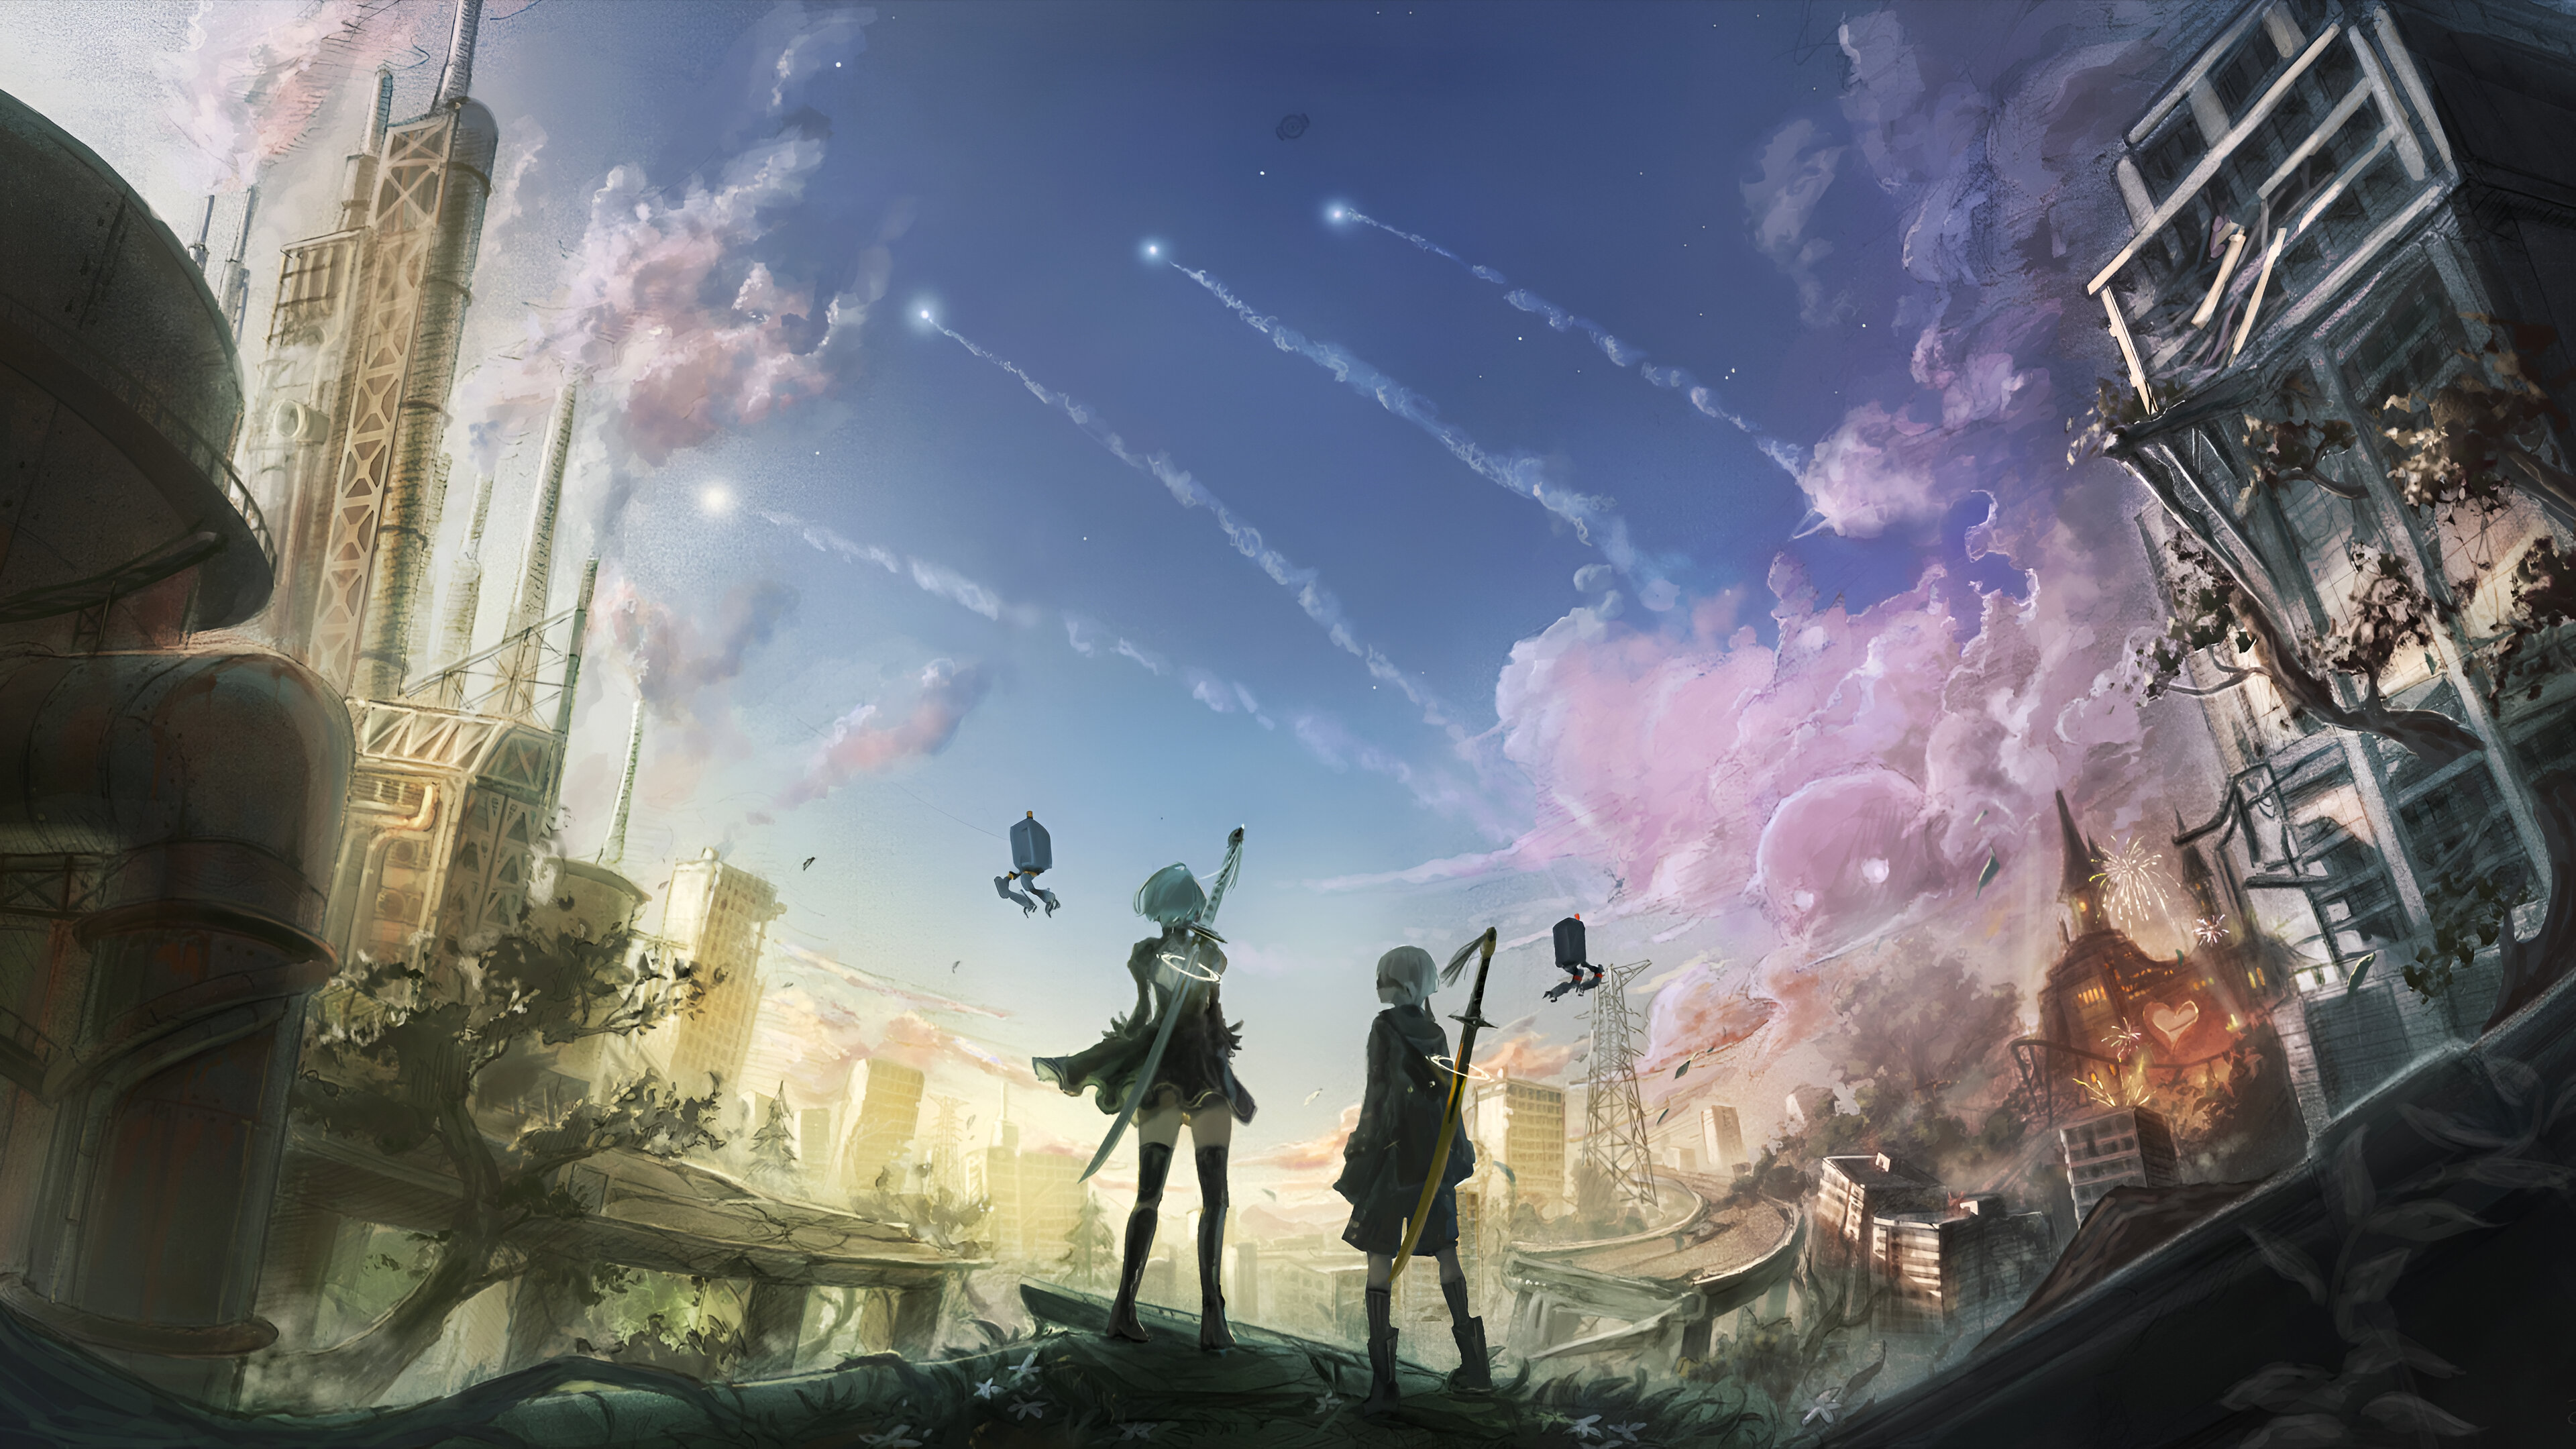 General 3840x2160 Nier: Automata 2B (Nier: Automata) 9S (Nier: Automata) artwork Platinum games video game characters sky video game girls clouds video game boys standing sword women with swords men with swords blindfold video game art building apocalyptic sunlight black thigh highs robot thigh-highs short hair